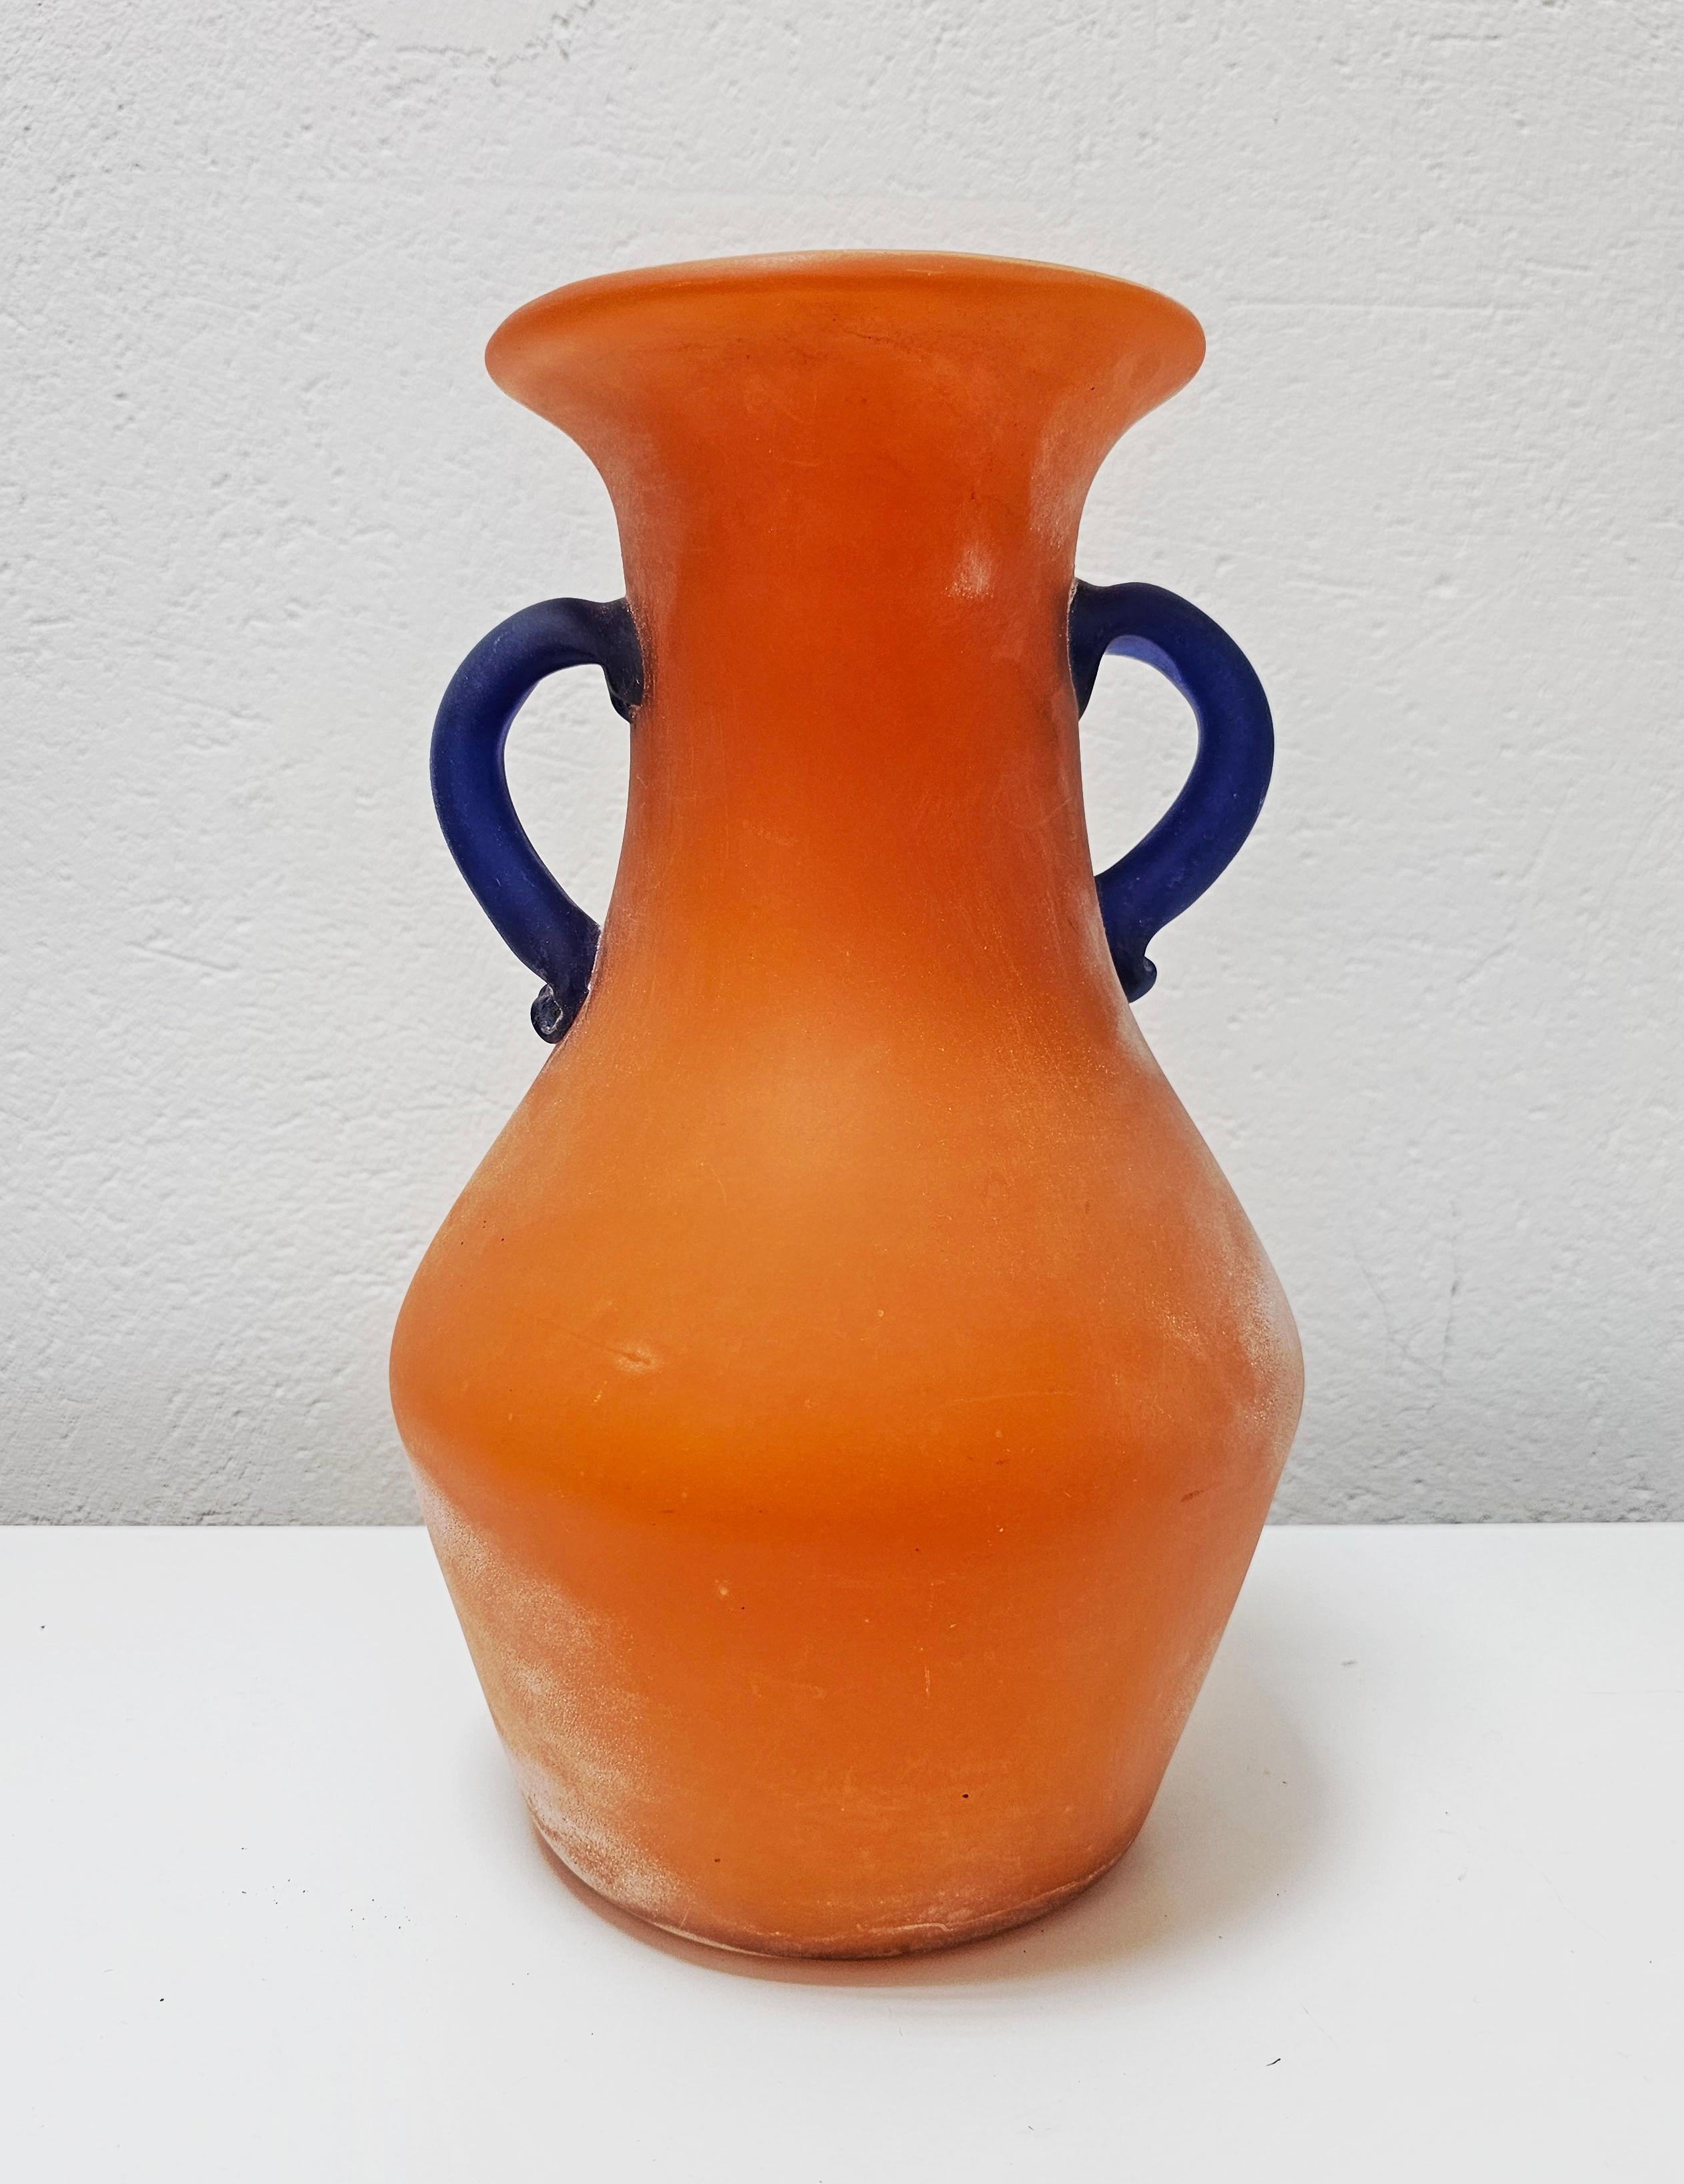 In this listing you will find a gorgeous, rare, extra large Murano Glass Scavo vase, done in vibrant orange glass, with the handles in deep blue glass. The vase was designed by Carlo Moretti in 1970s in Moretti's workshop in Murano Island, in